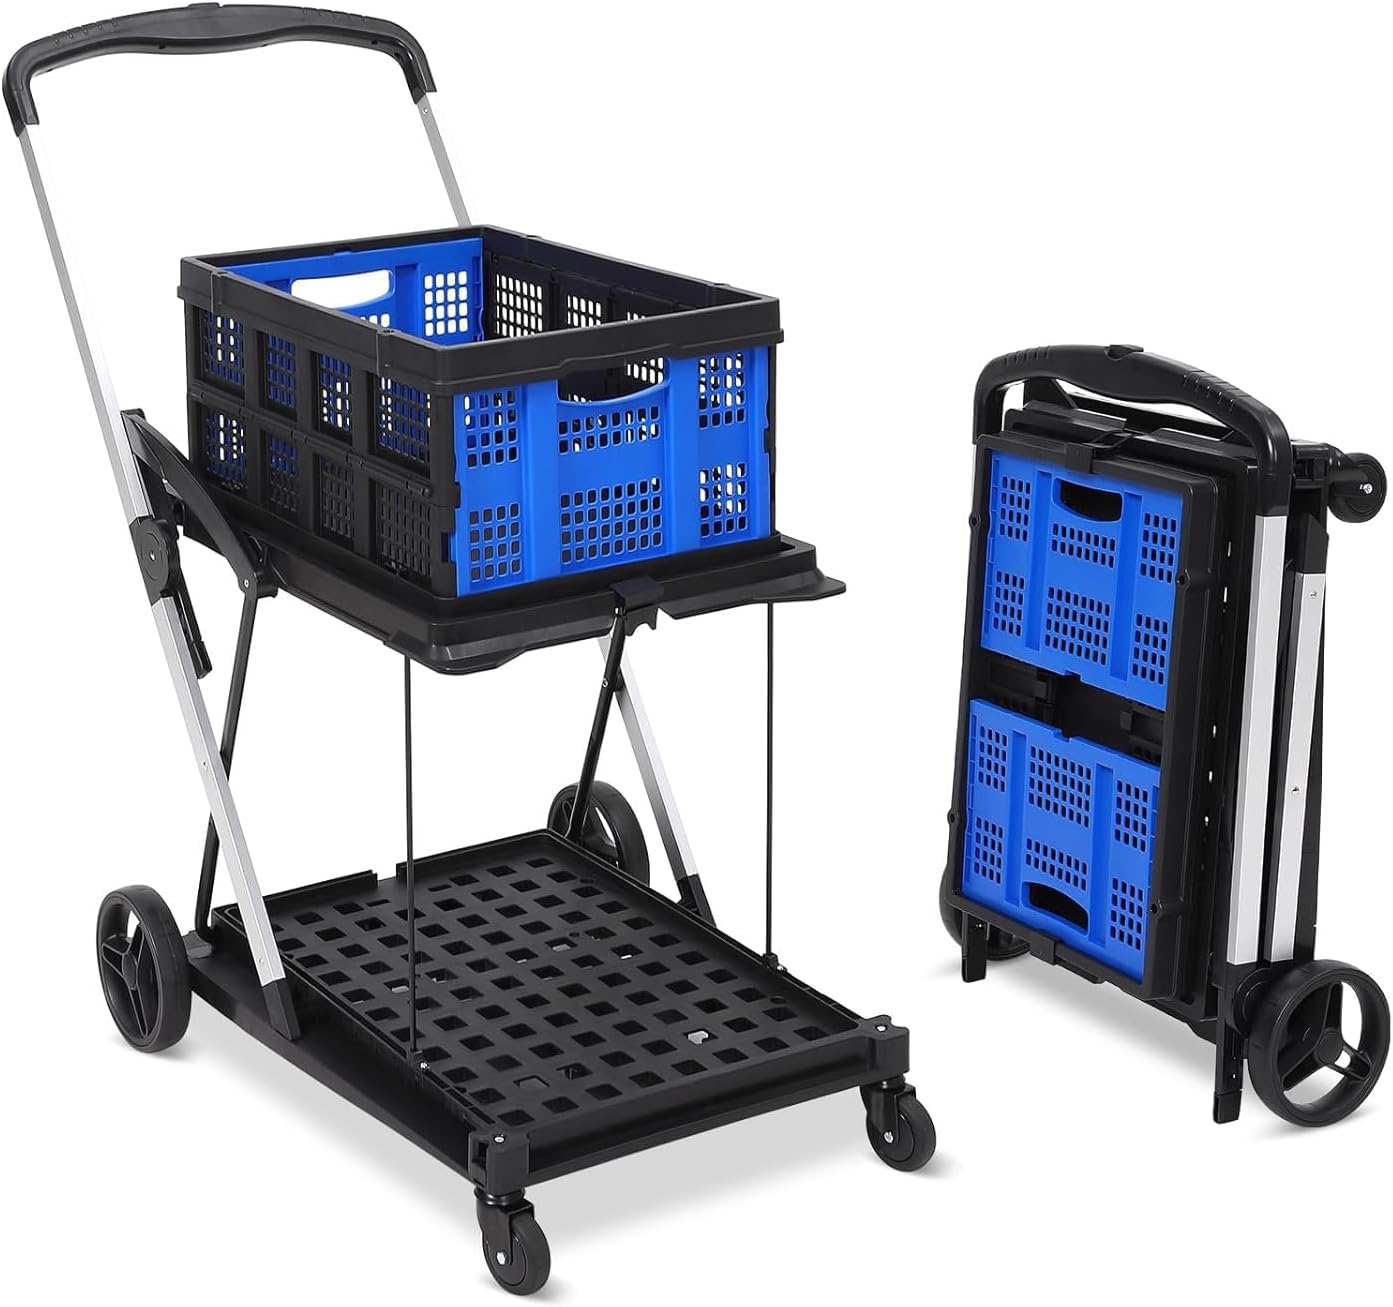 2-Tier Folding Shopping Cart with Wheels, Collapsible Service Cart with Storage Crate, Utility Carts, 200LBS High-Capacity Storage Outdoor Wagon for Groceries, Hand Truck